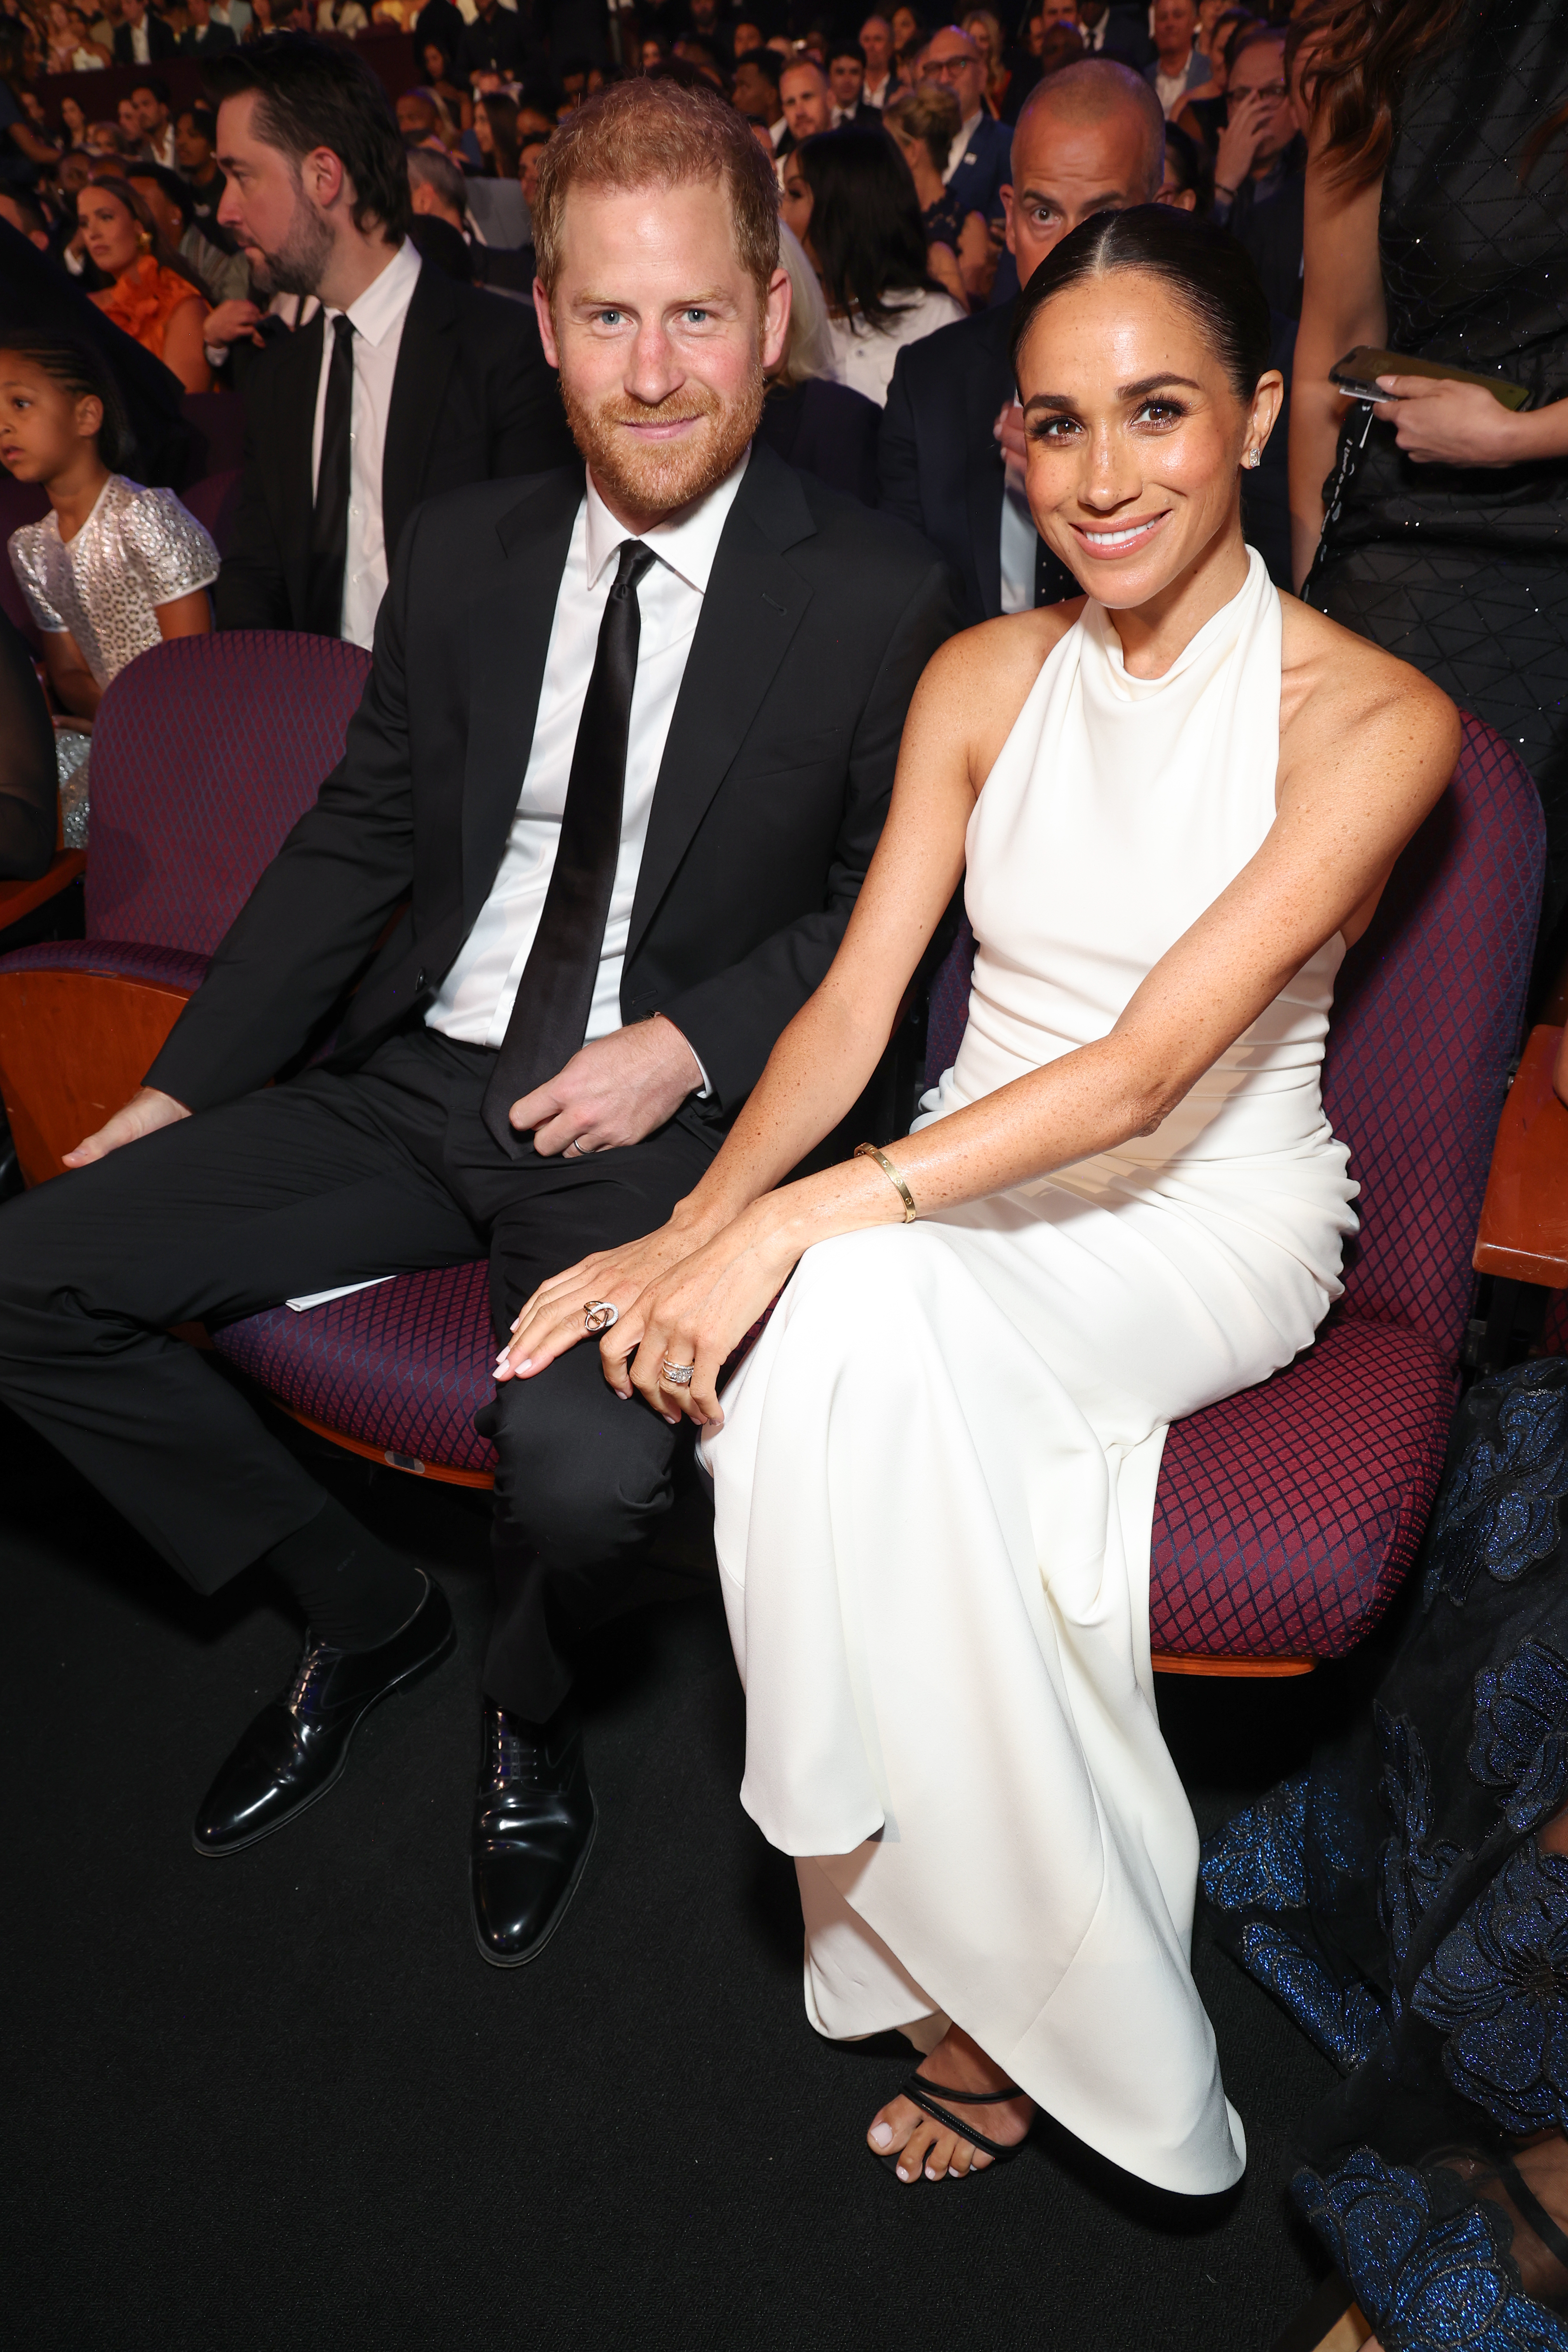 Prince Harry with Meghan Markle at the awards